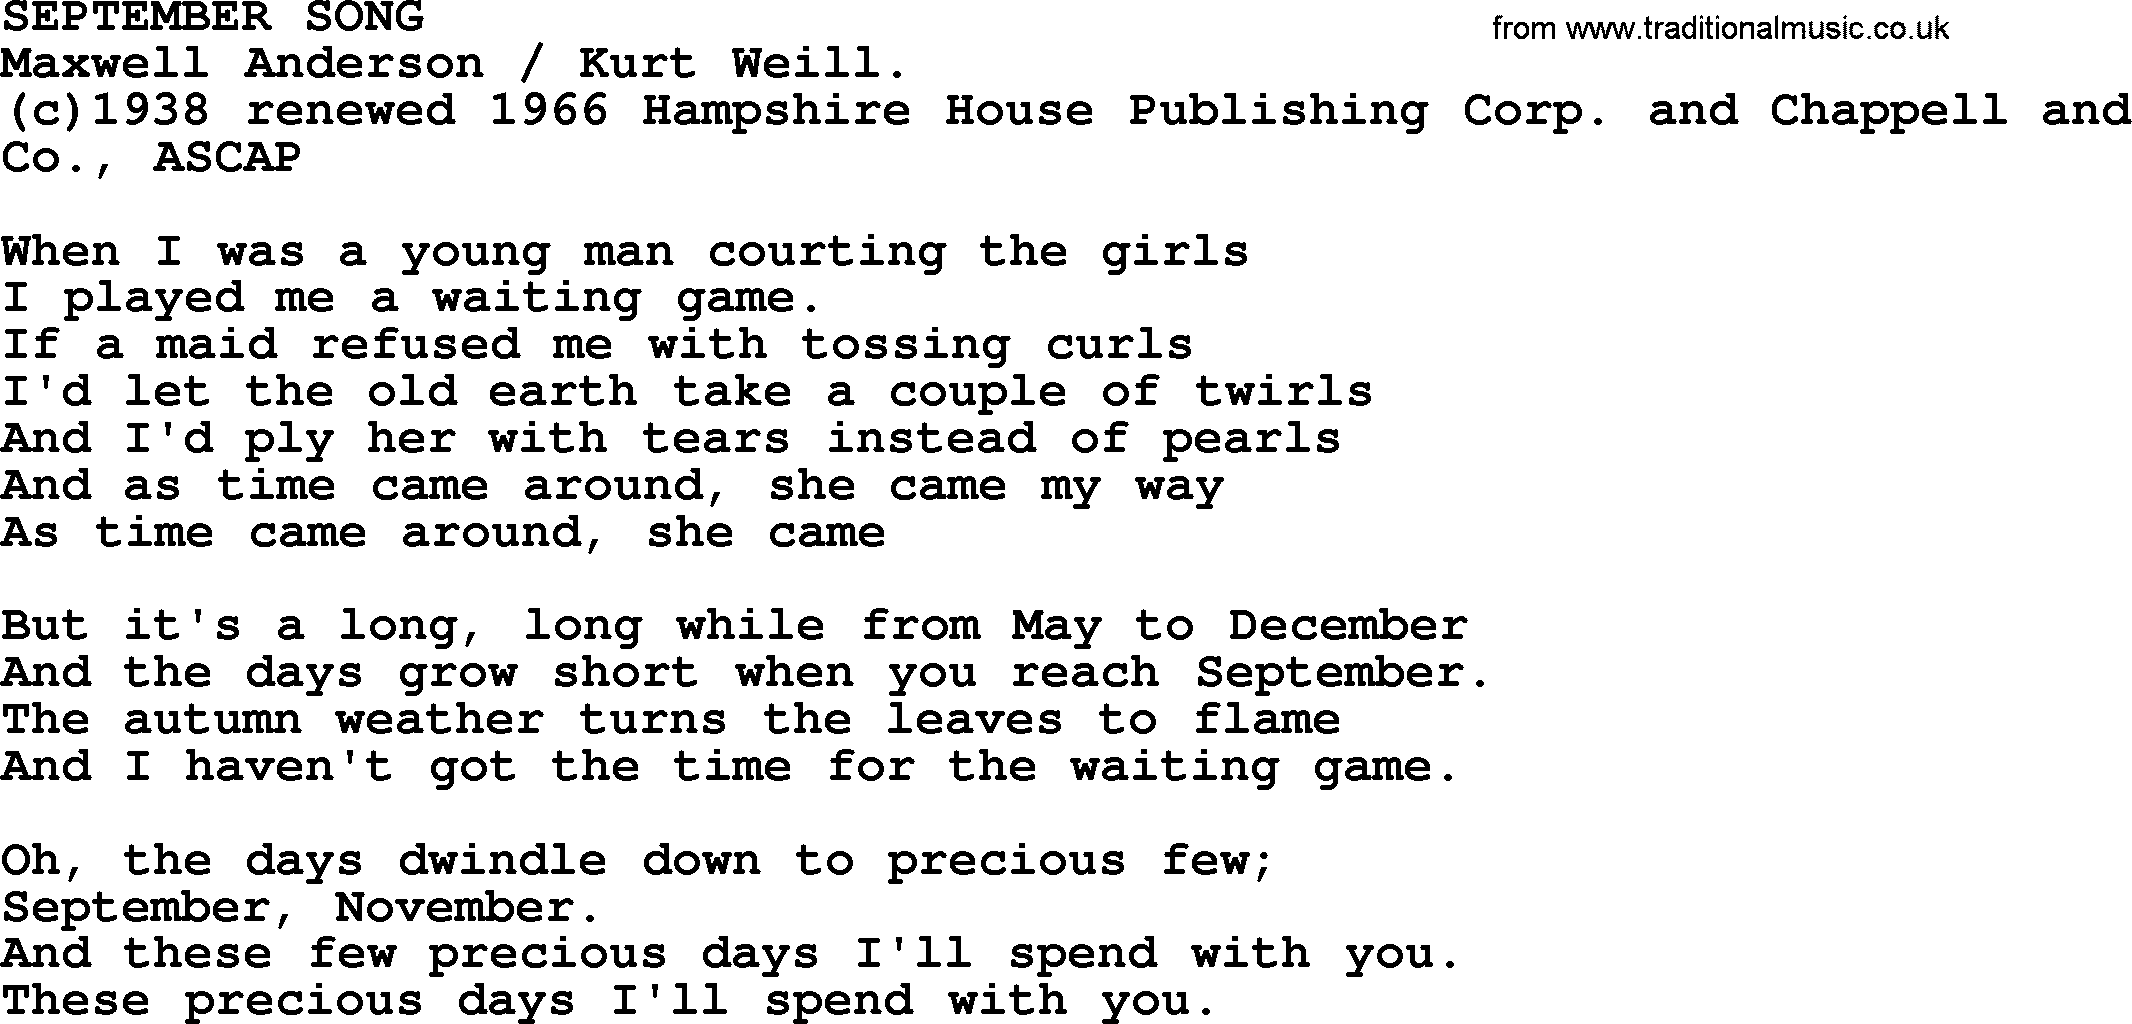 Peter, Paul and Mary song September Song lyrics